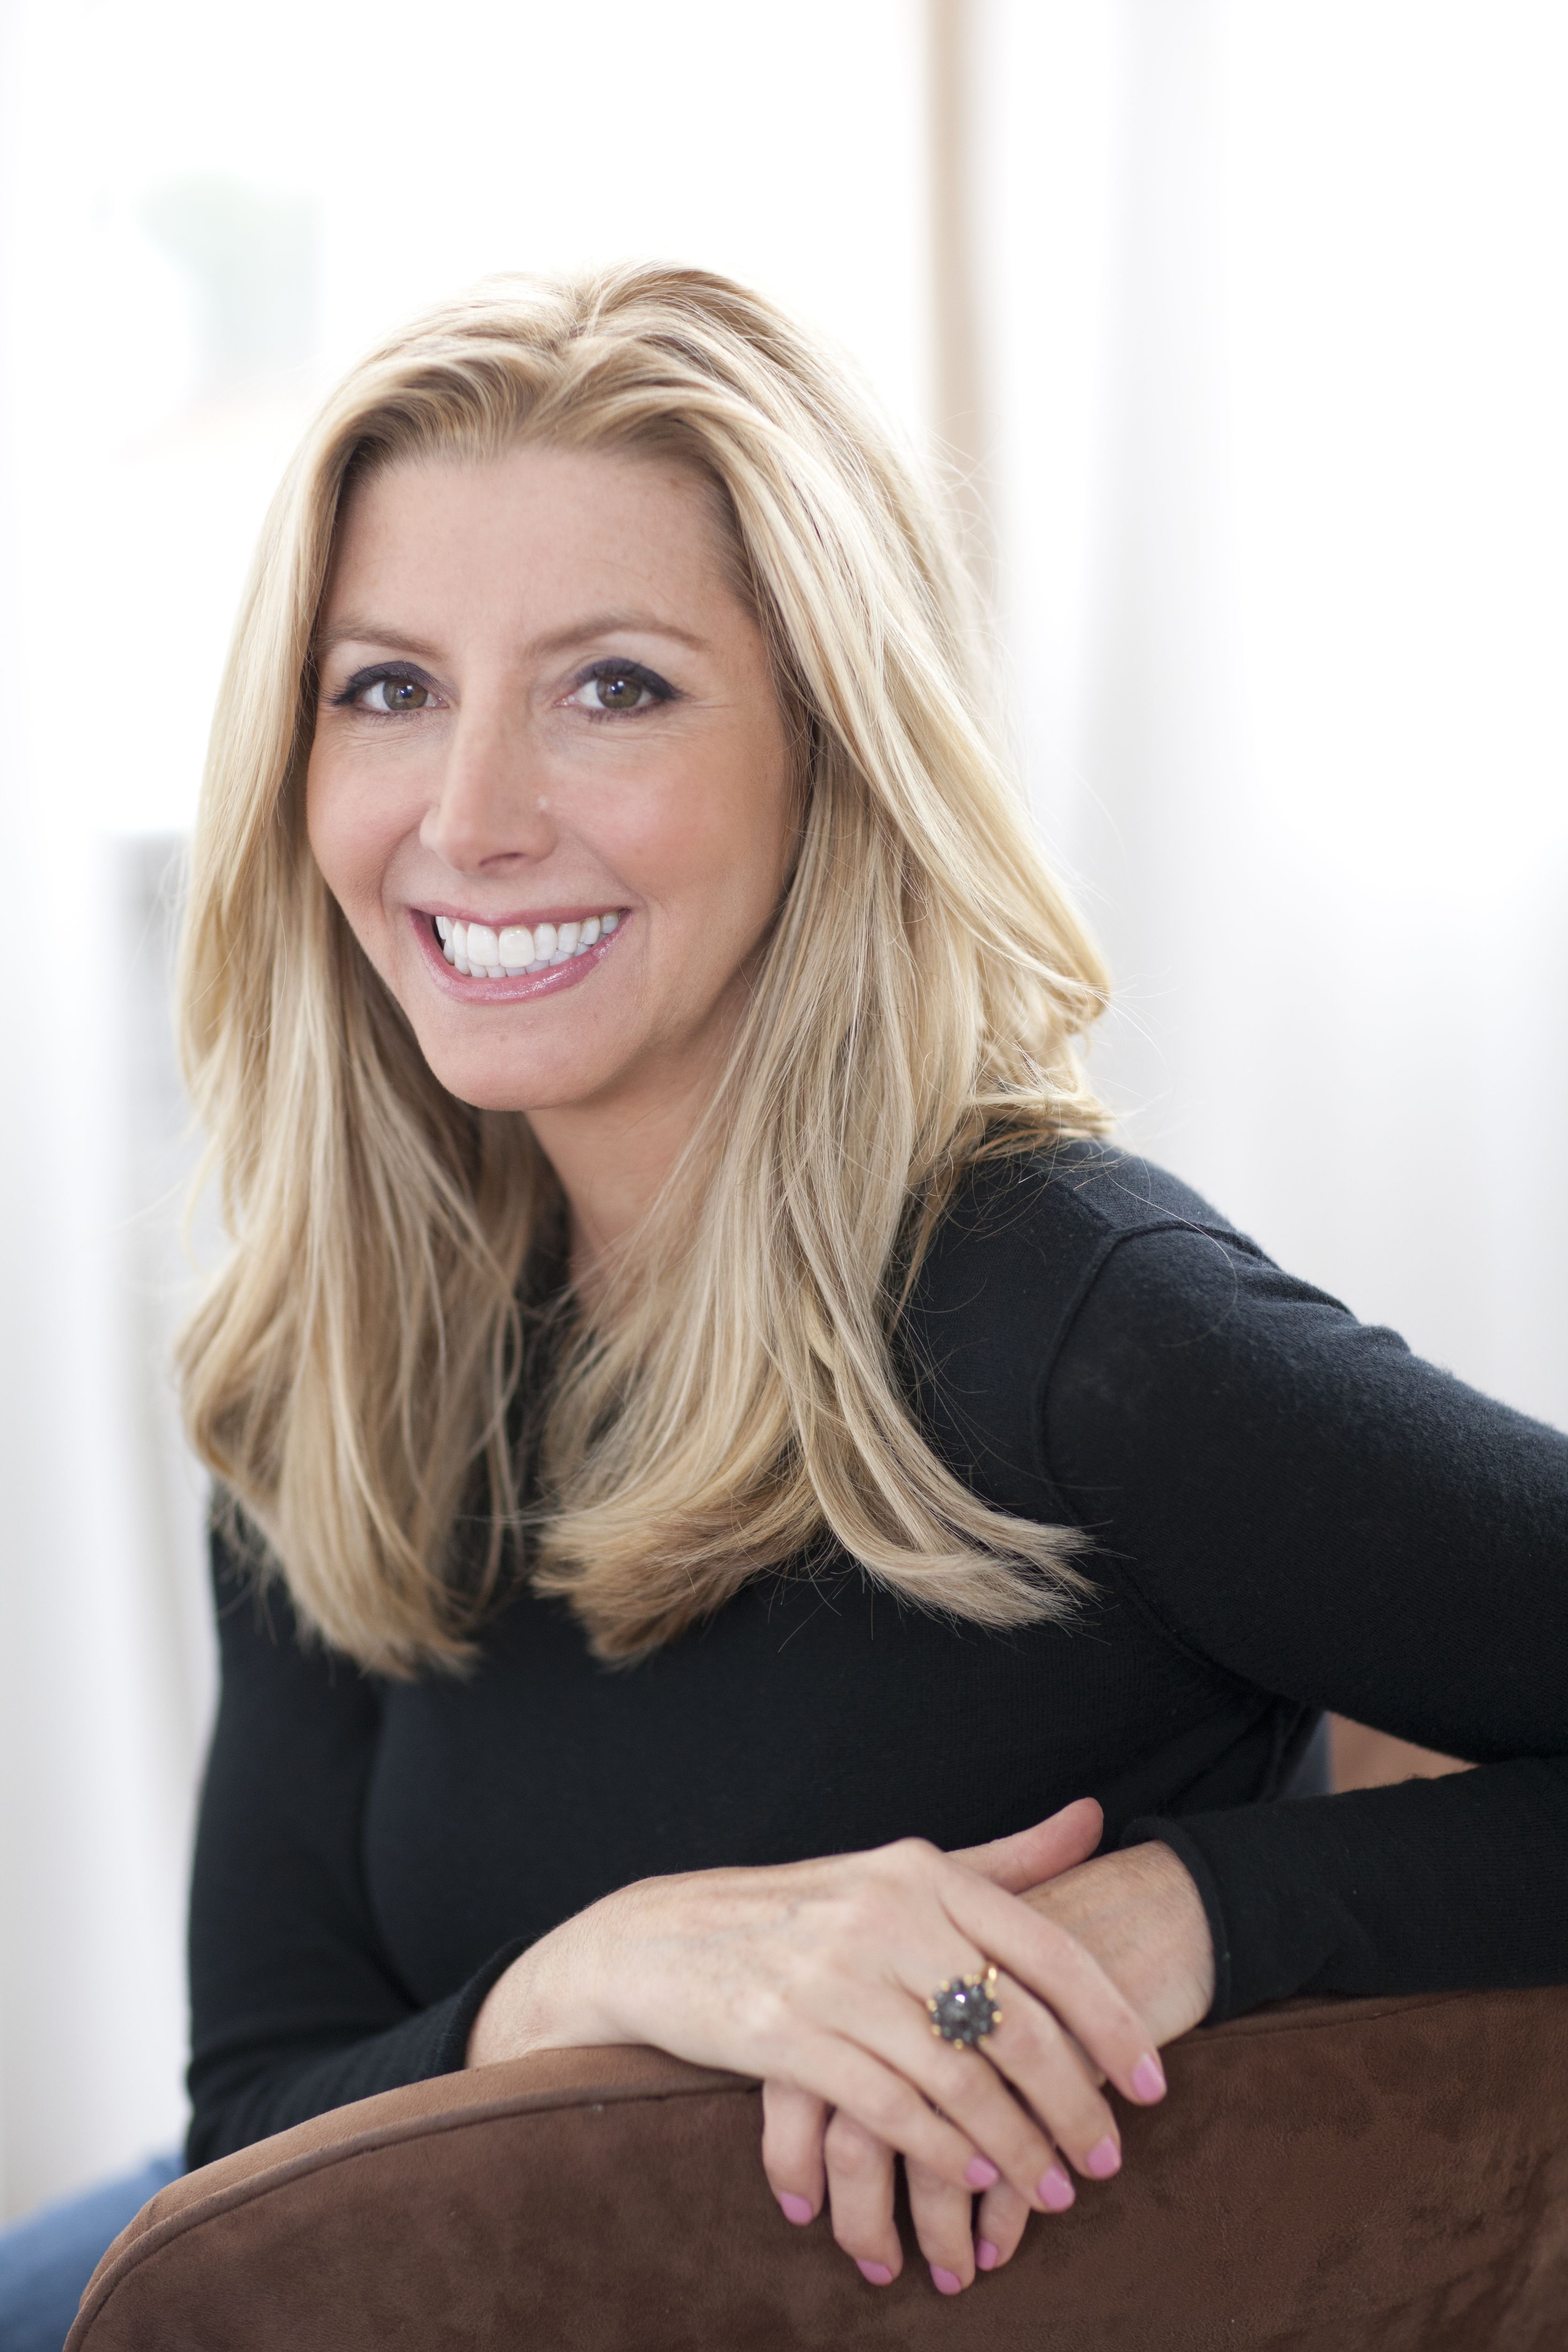 Sara Blakely started Spanx in 1998 and never gave up. She just sold her  company for over a billion dollars. [Image] : r/GetMotivated